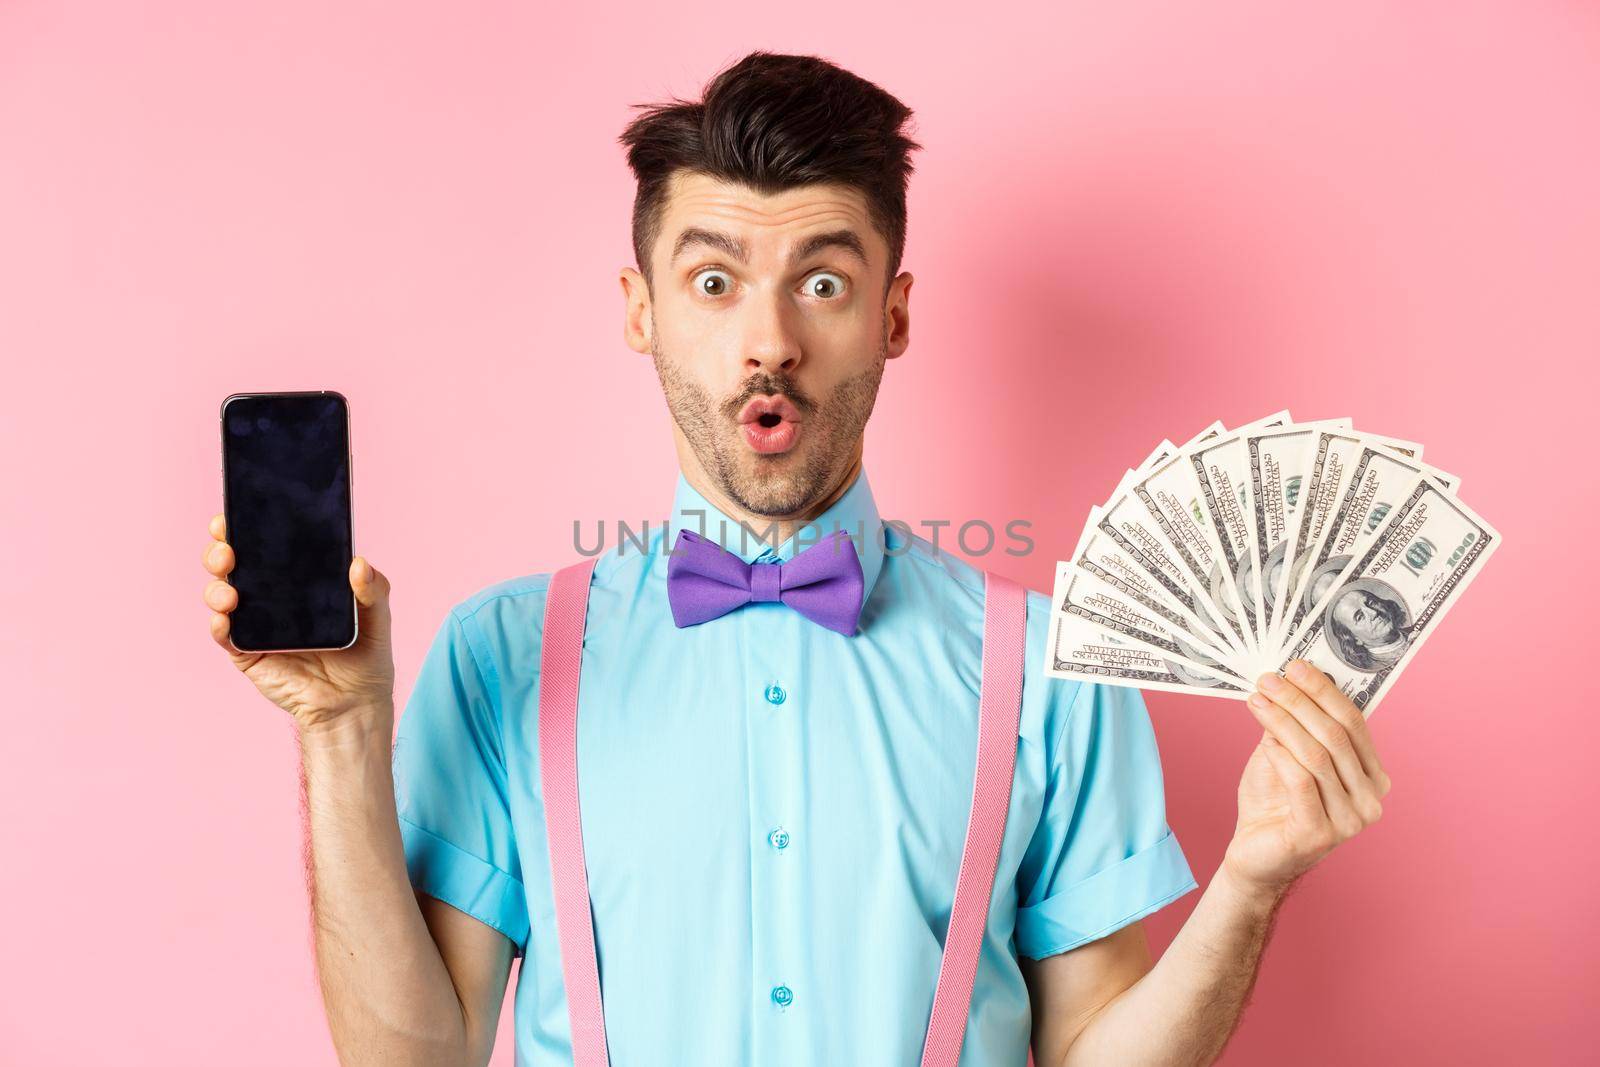 E-commerce and shopping concept. Surprised man showing blank smartphone screen and money, saying wow with amazed face, checking out online offer, pink background.